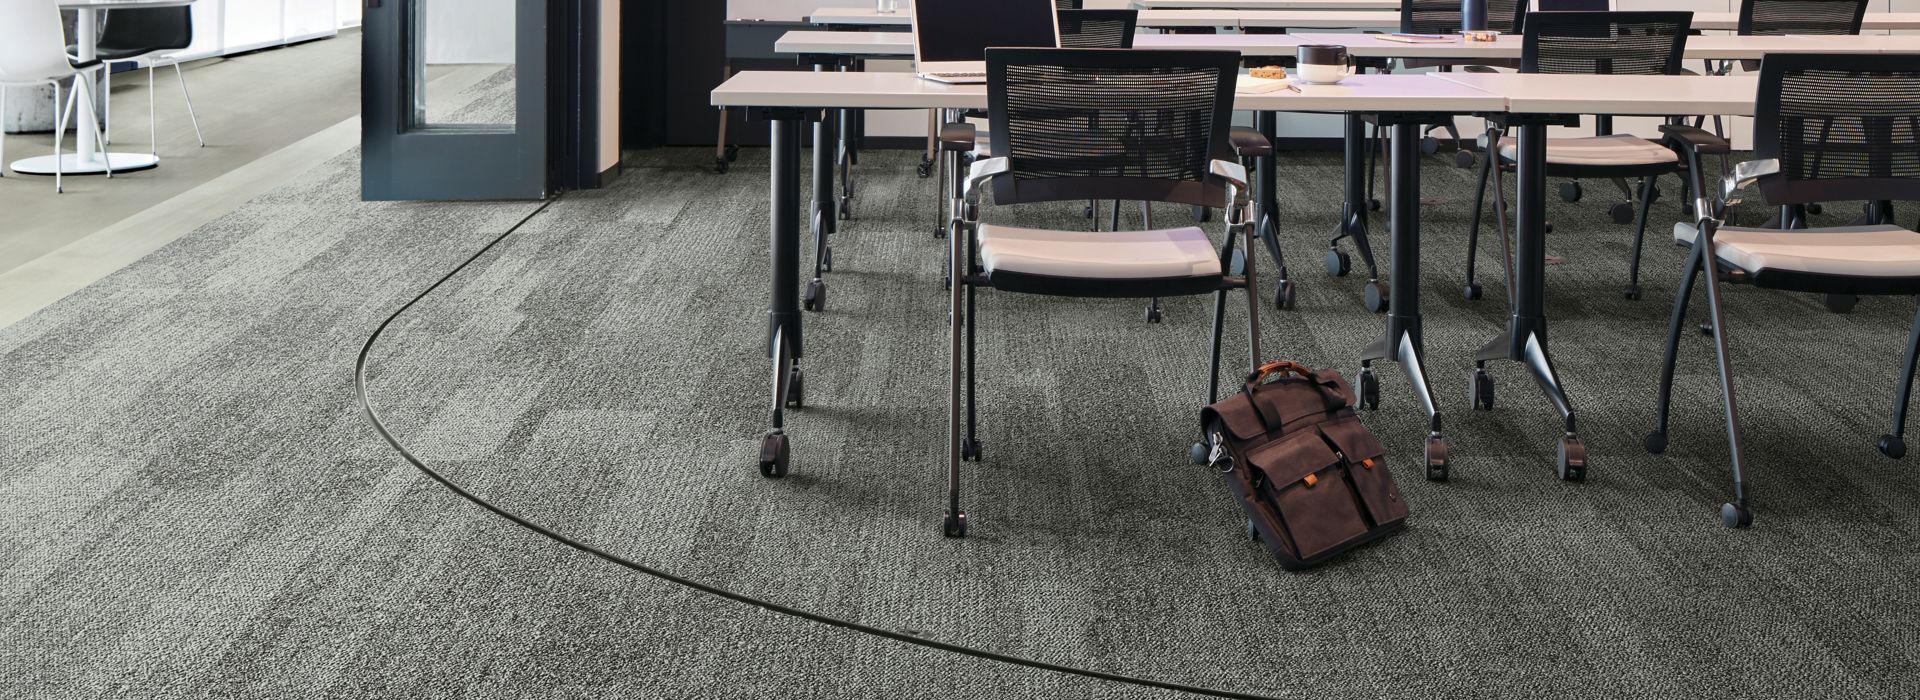 Interface Open Air 410 plank carpet tile in open conference room with satchel leaning on chair imagen número 1